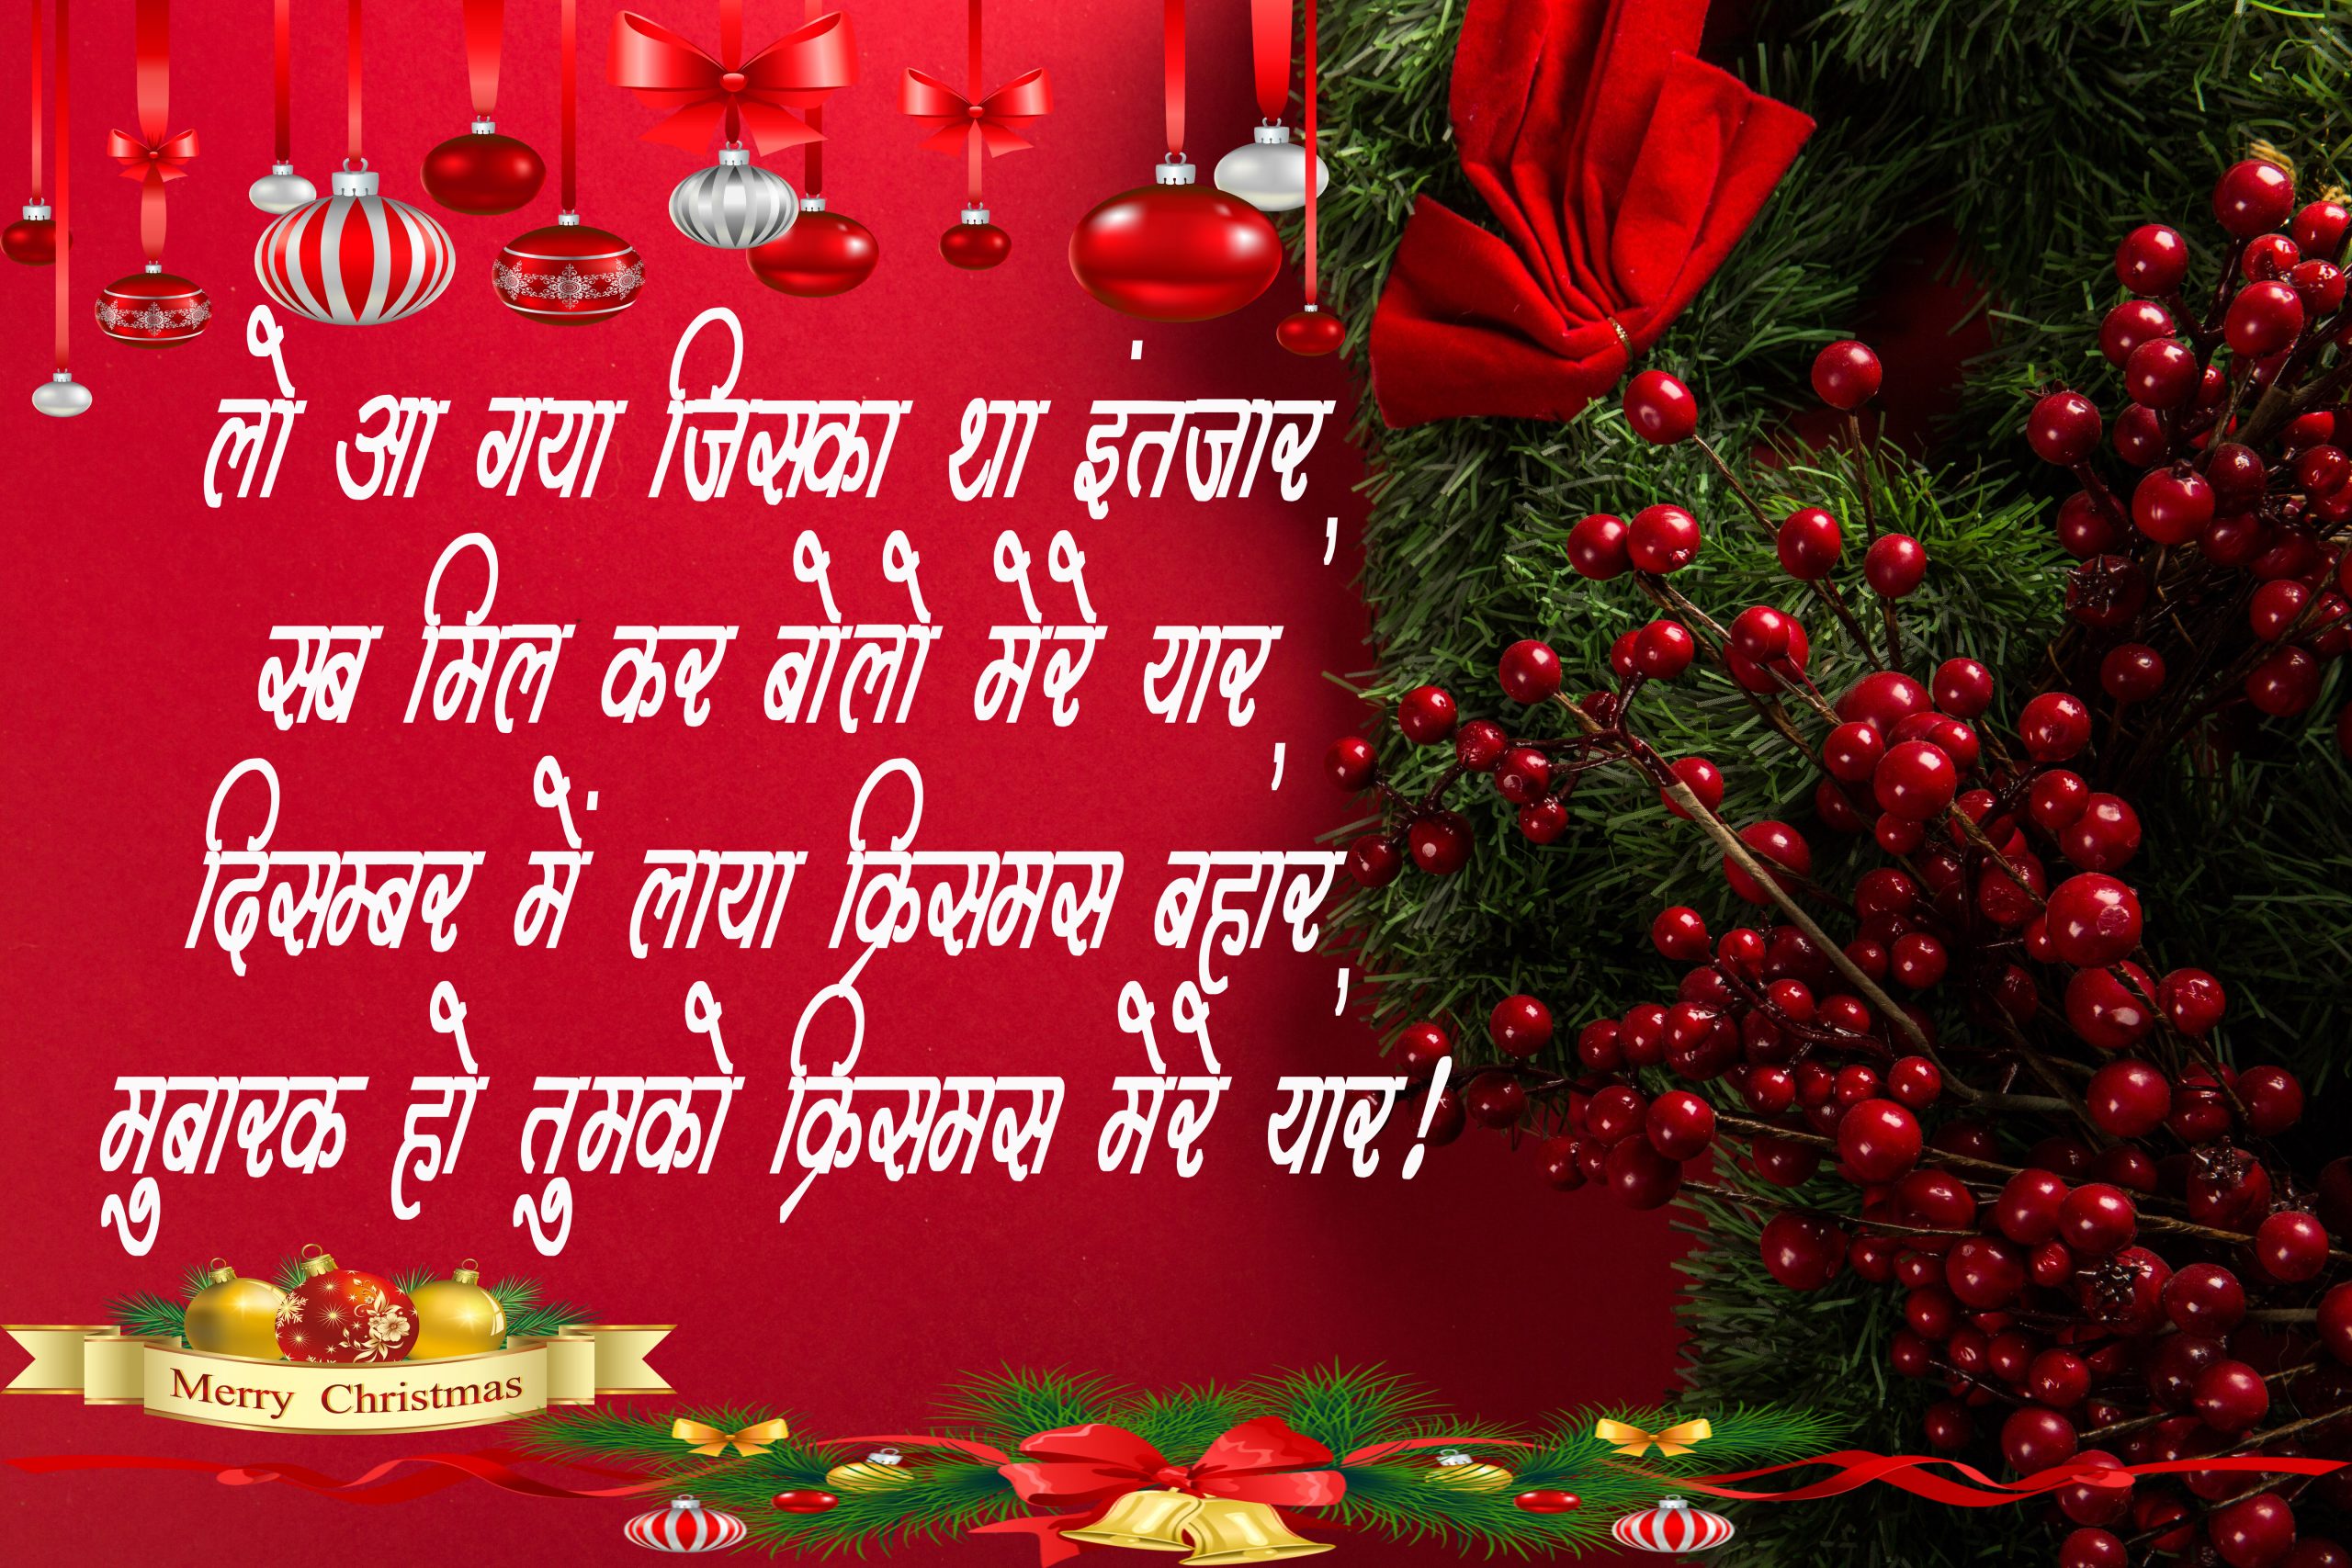 Merry Christmas Wishes Messages in Hindi